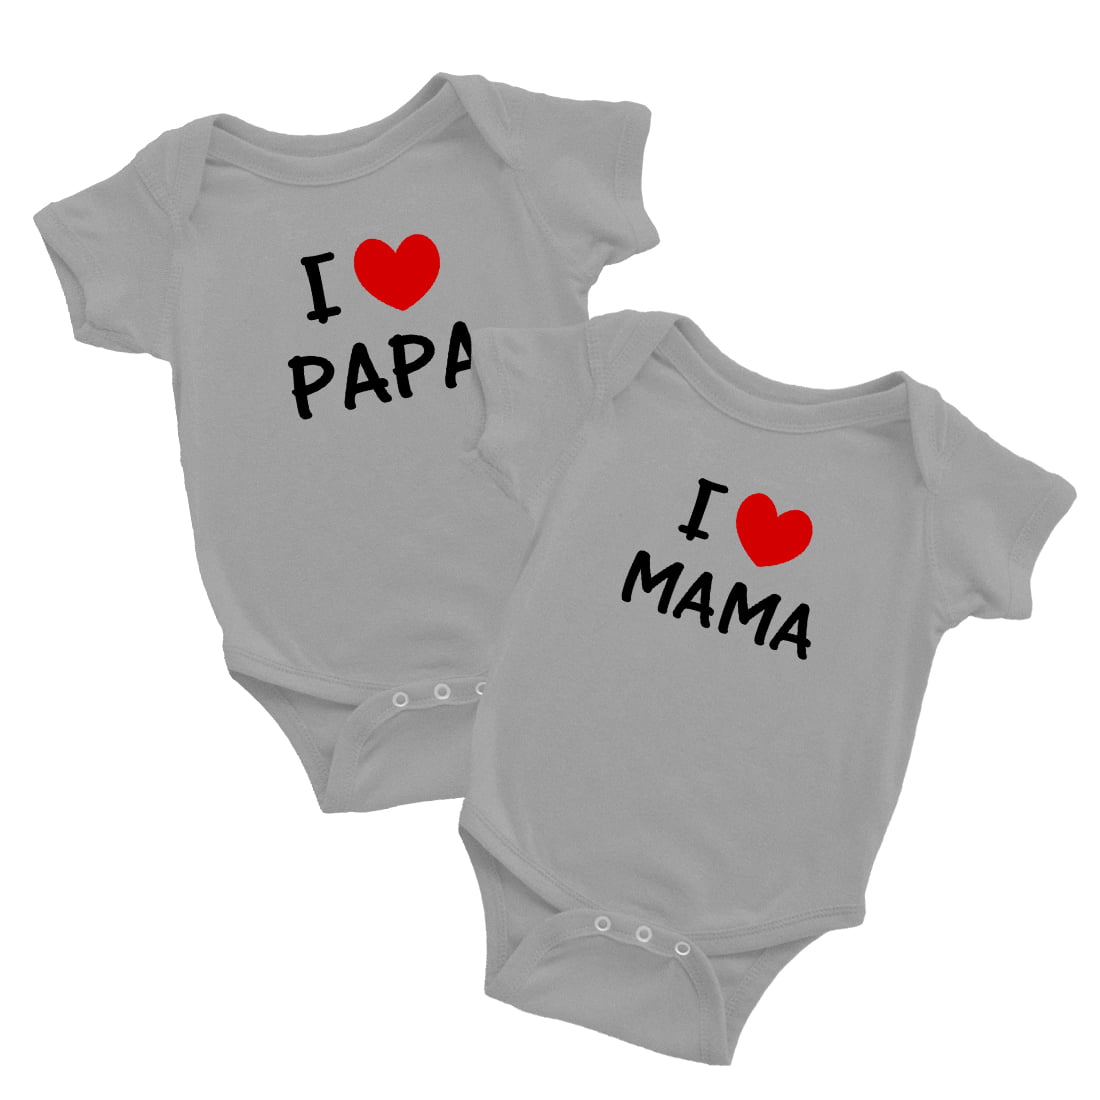 I Love Mama and I Love Papa Baby Bodysuit Twins Soft Toddler Infant Wear  White Clothing Summer Wear